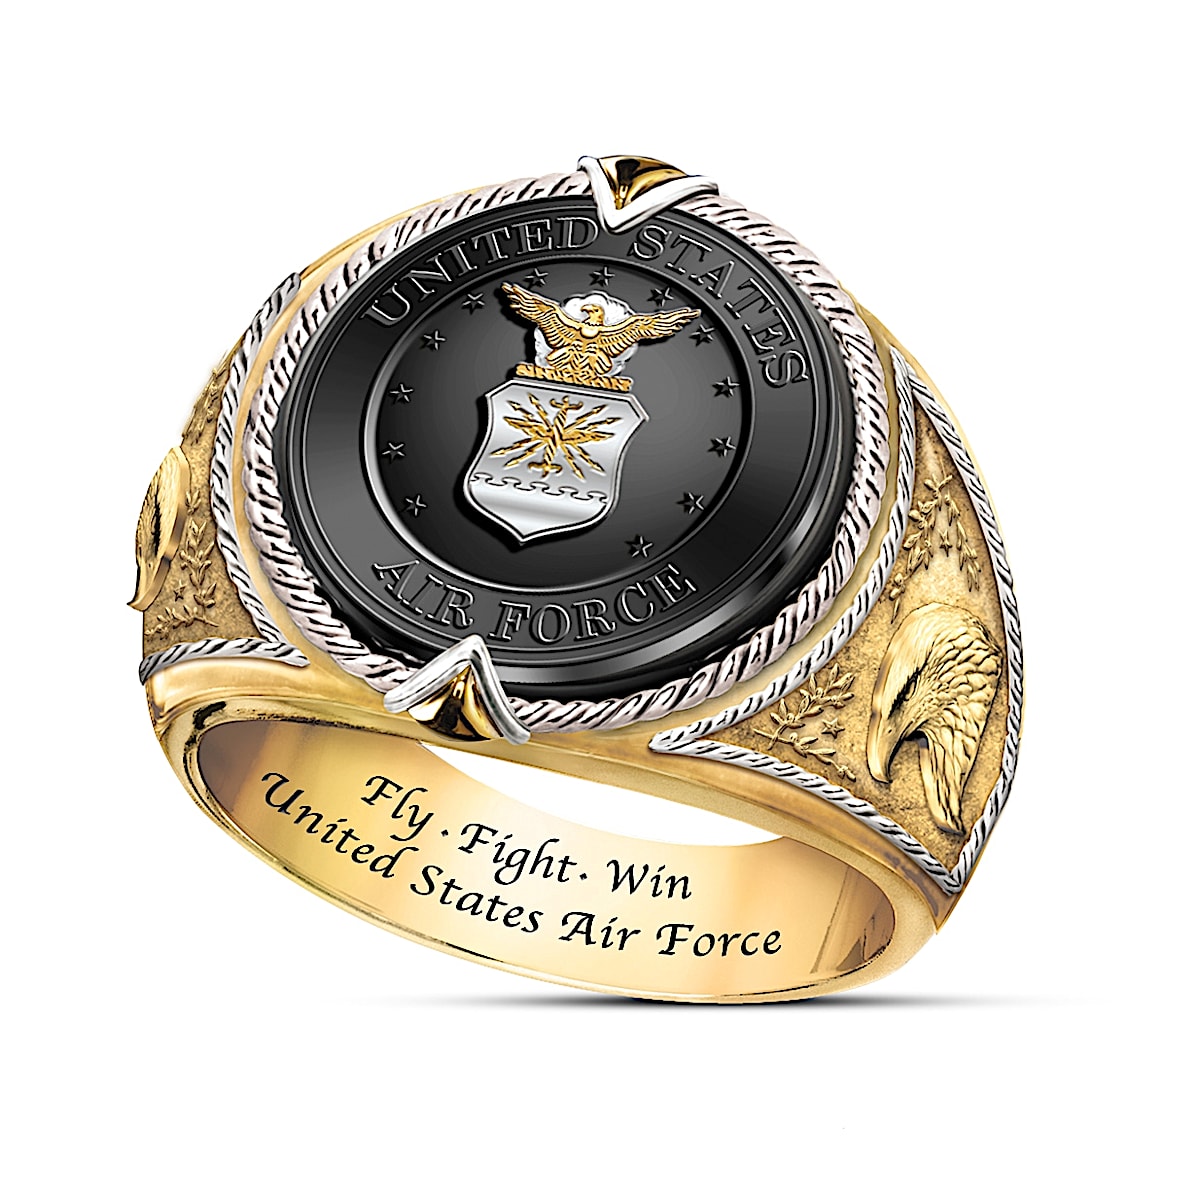 Buy United States Air Force Ring, Silver US Army Ring, US Eagle Ring, US  Military Ring , 925K Sterling Silver Force Ring With Stone Online in India  - Etsy